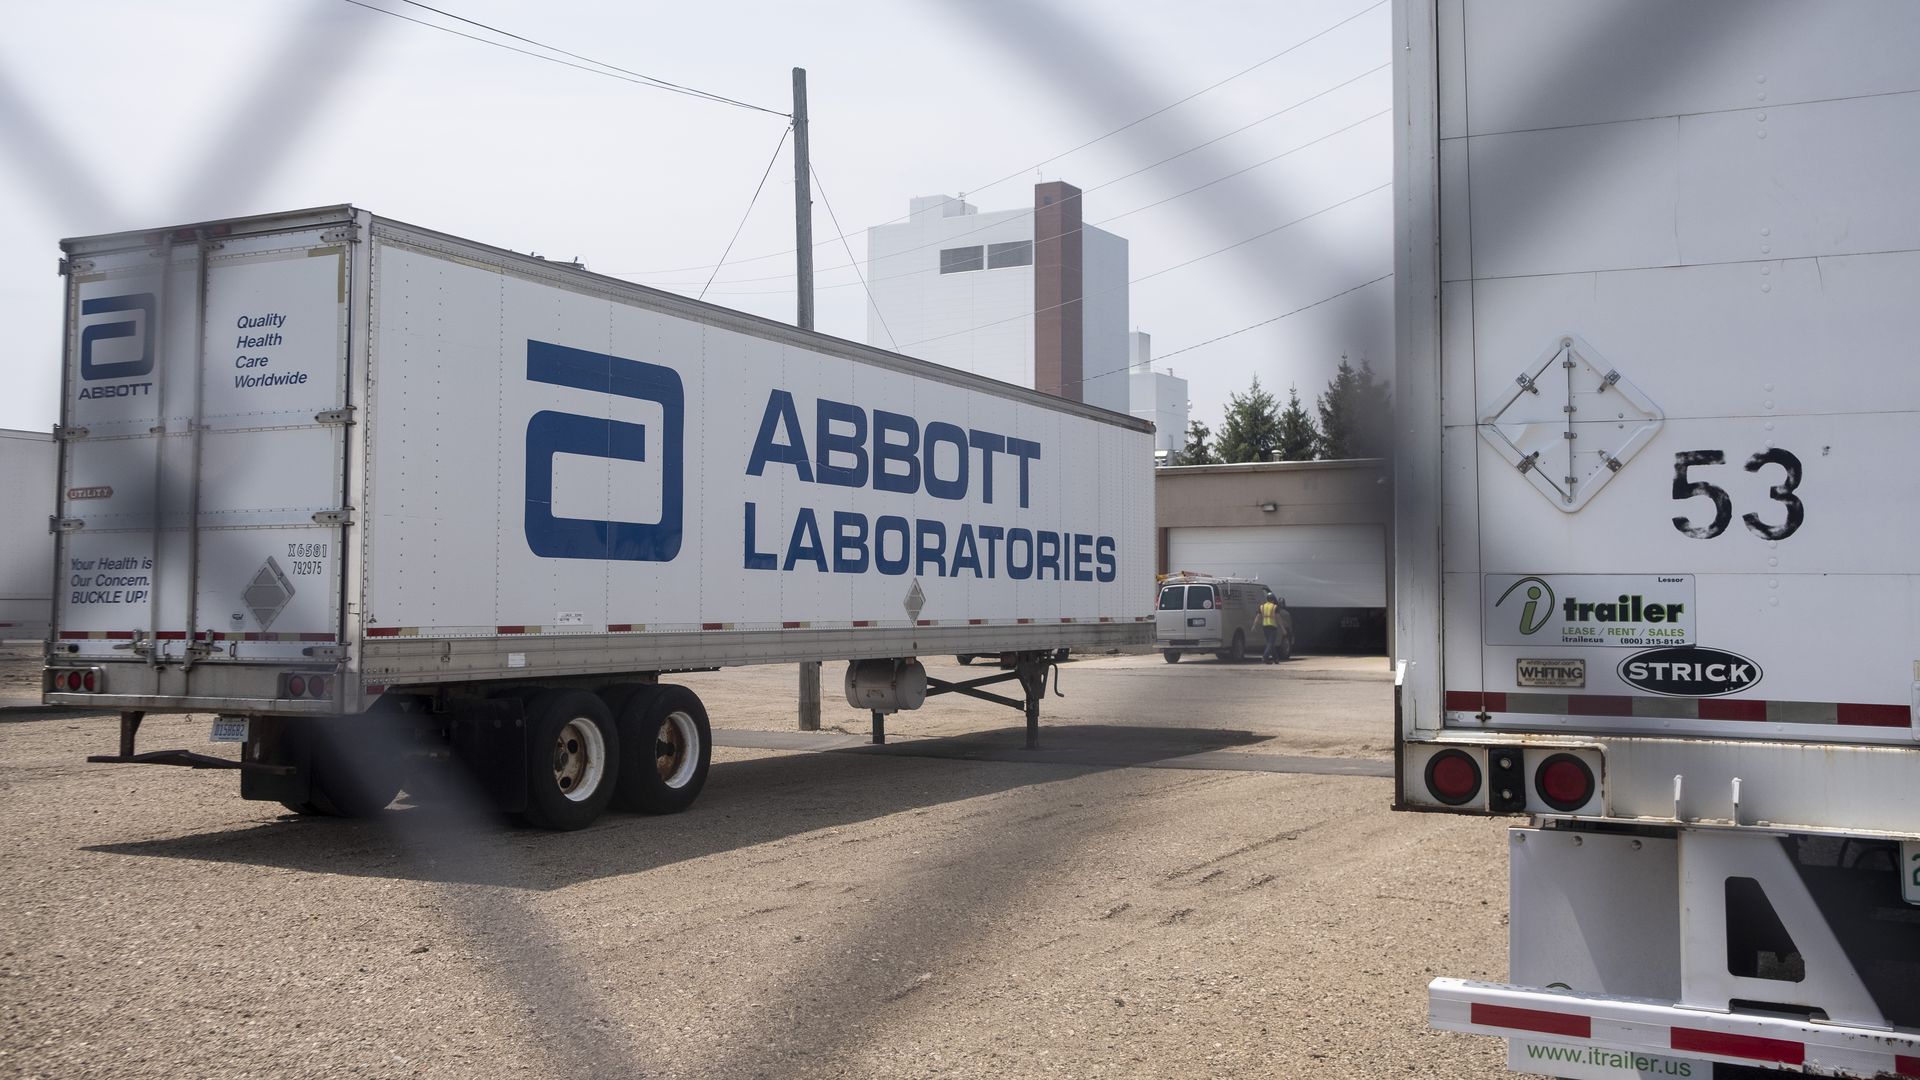 Photo of a truck trailer with the Abbott Laboratories' name and logo printed on the side, as viewed through a wire fence